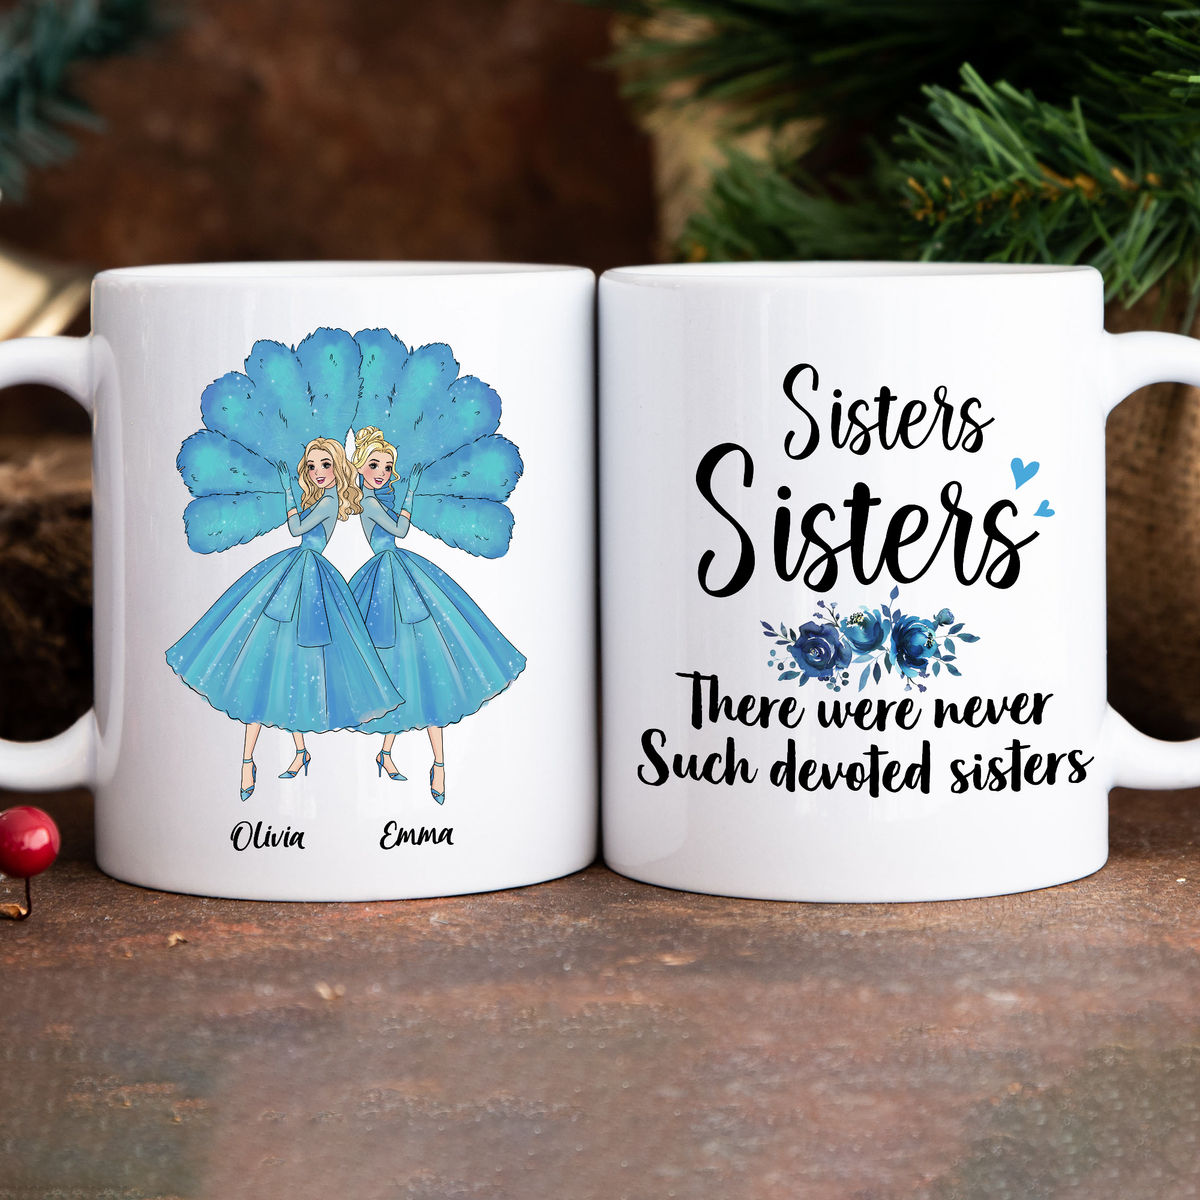 Personalized Mug - Personalized Mug For Sisters - Sisters Sisters - White Christmas - Up To 5 Woman, gift for her, gift for sisters (58095)_5